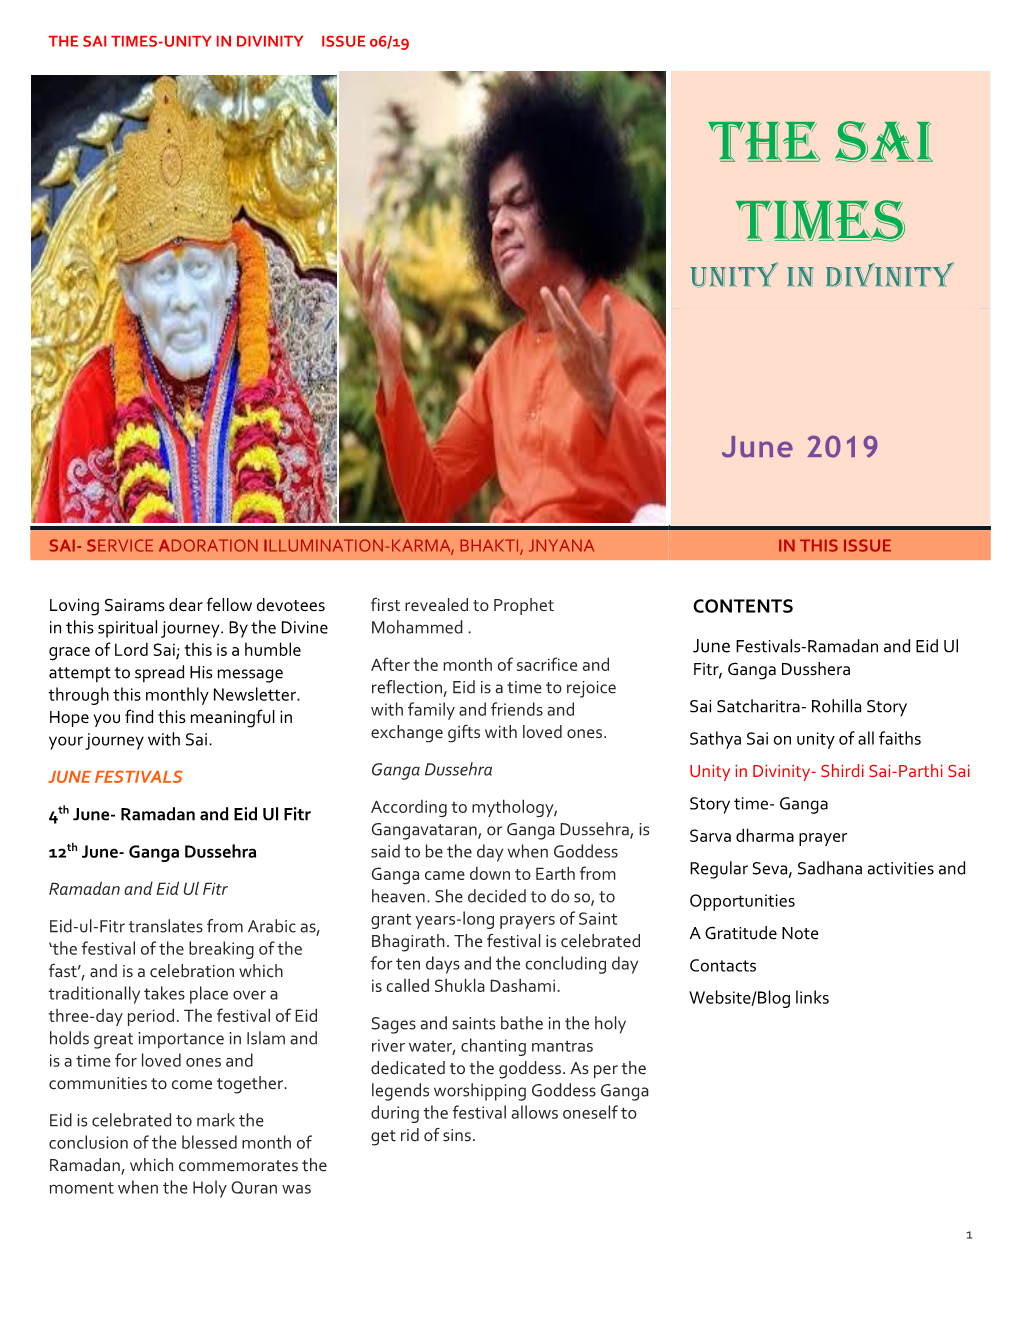 The Sai Times-Unity in Divinity Issue 06/19